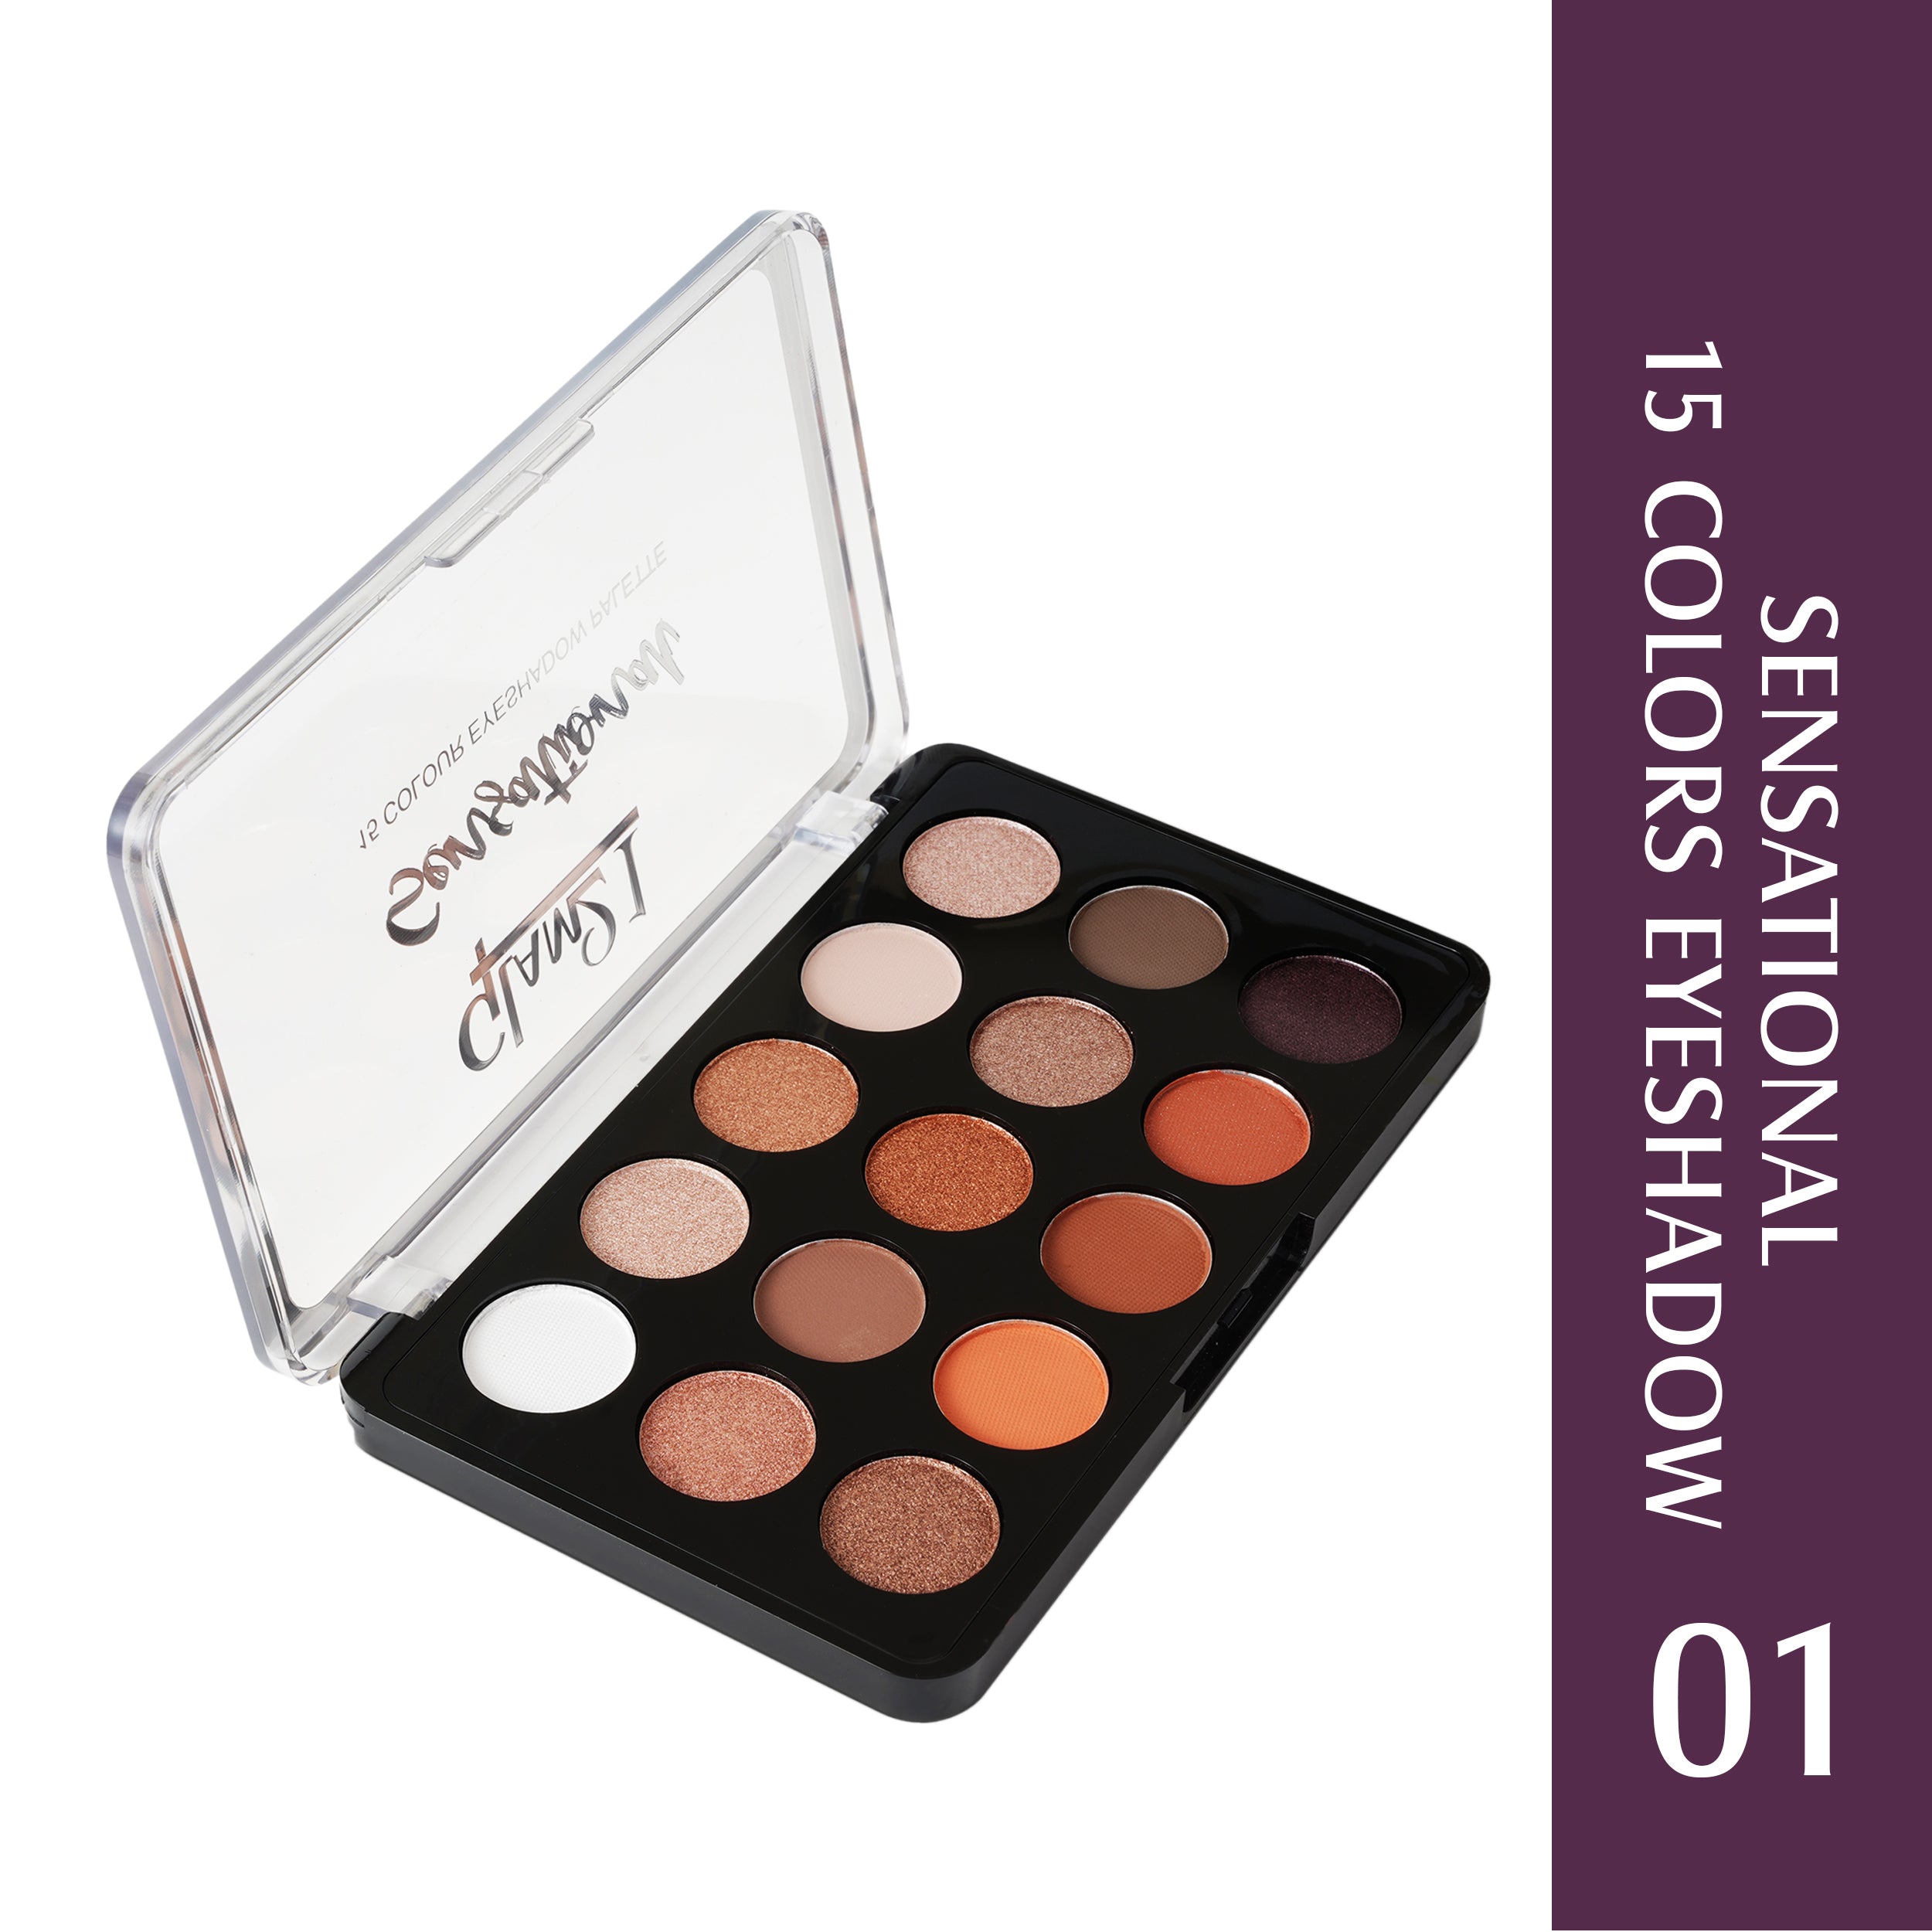 Glam21 Sensational 15 Colour Eyeshadow Palette-Unique Combination of Mattes & Shimmers 14 g (Shade-01)